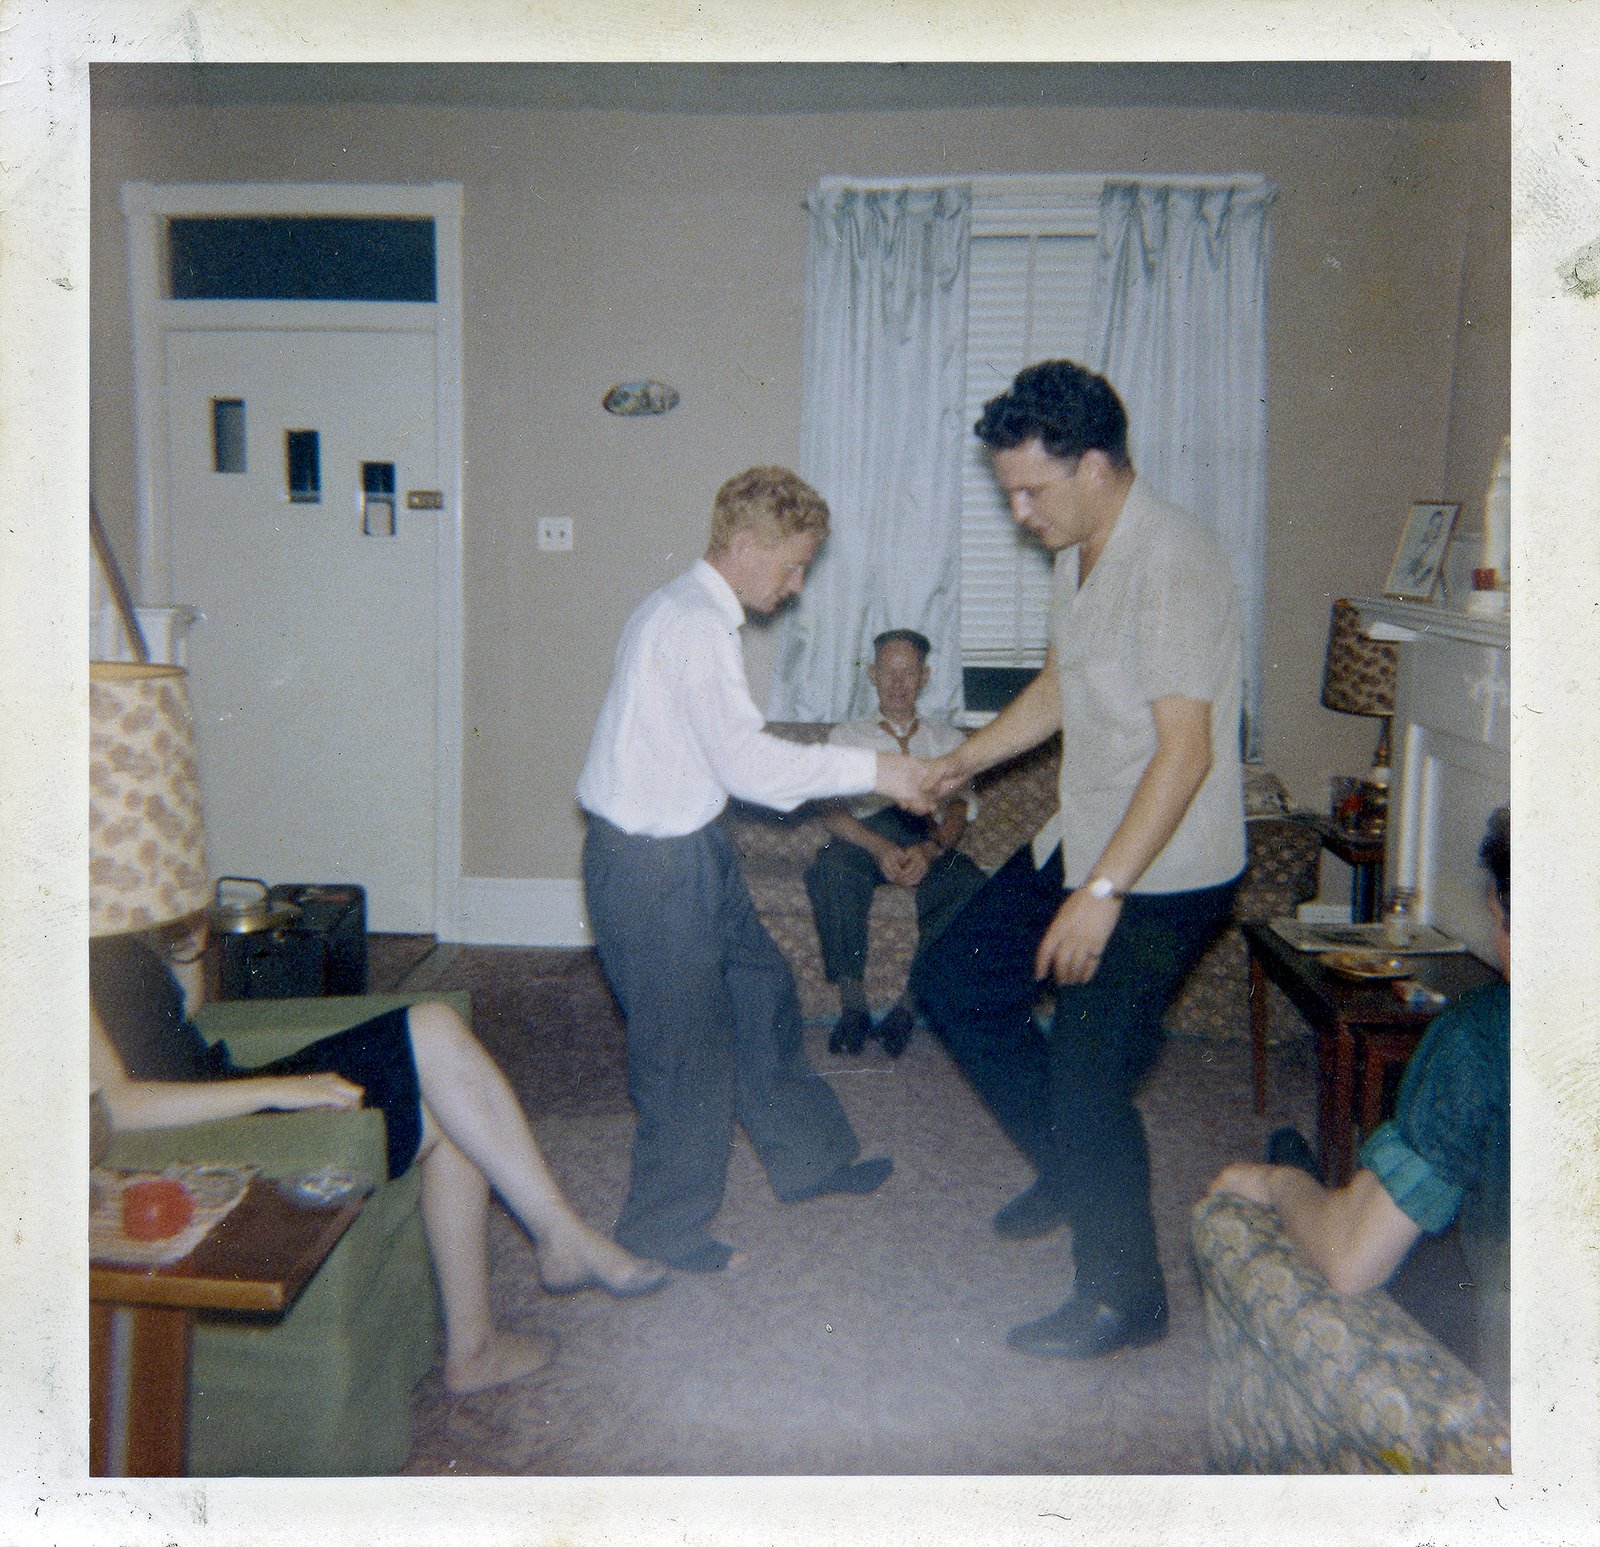 Men set dancing at a house party in Germantown, Philadelphia in the early 1960s.